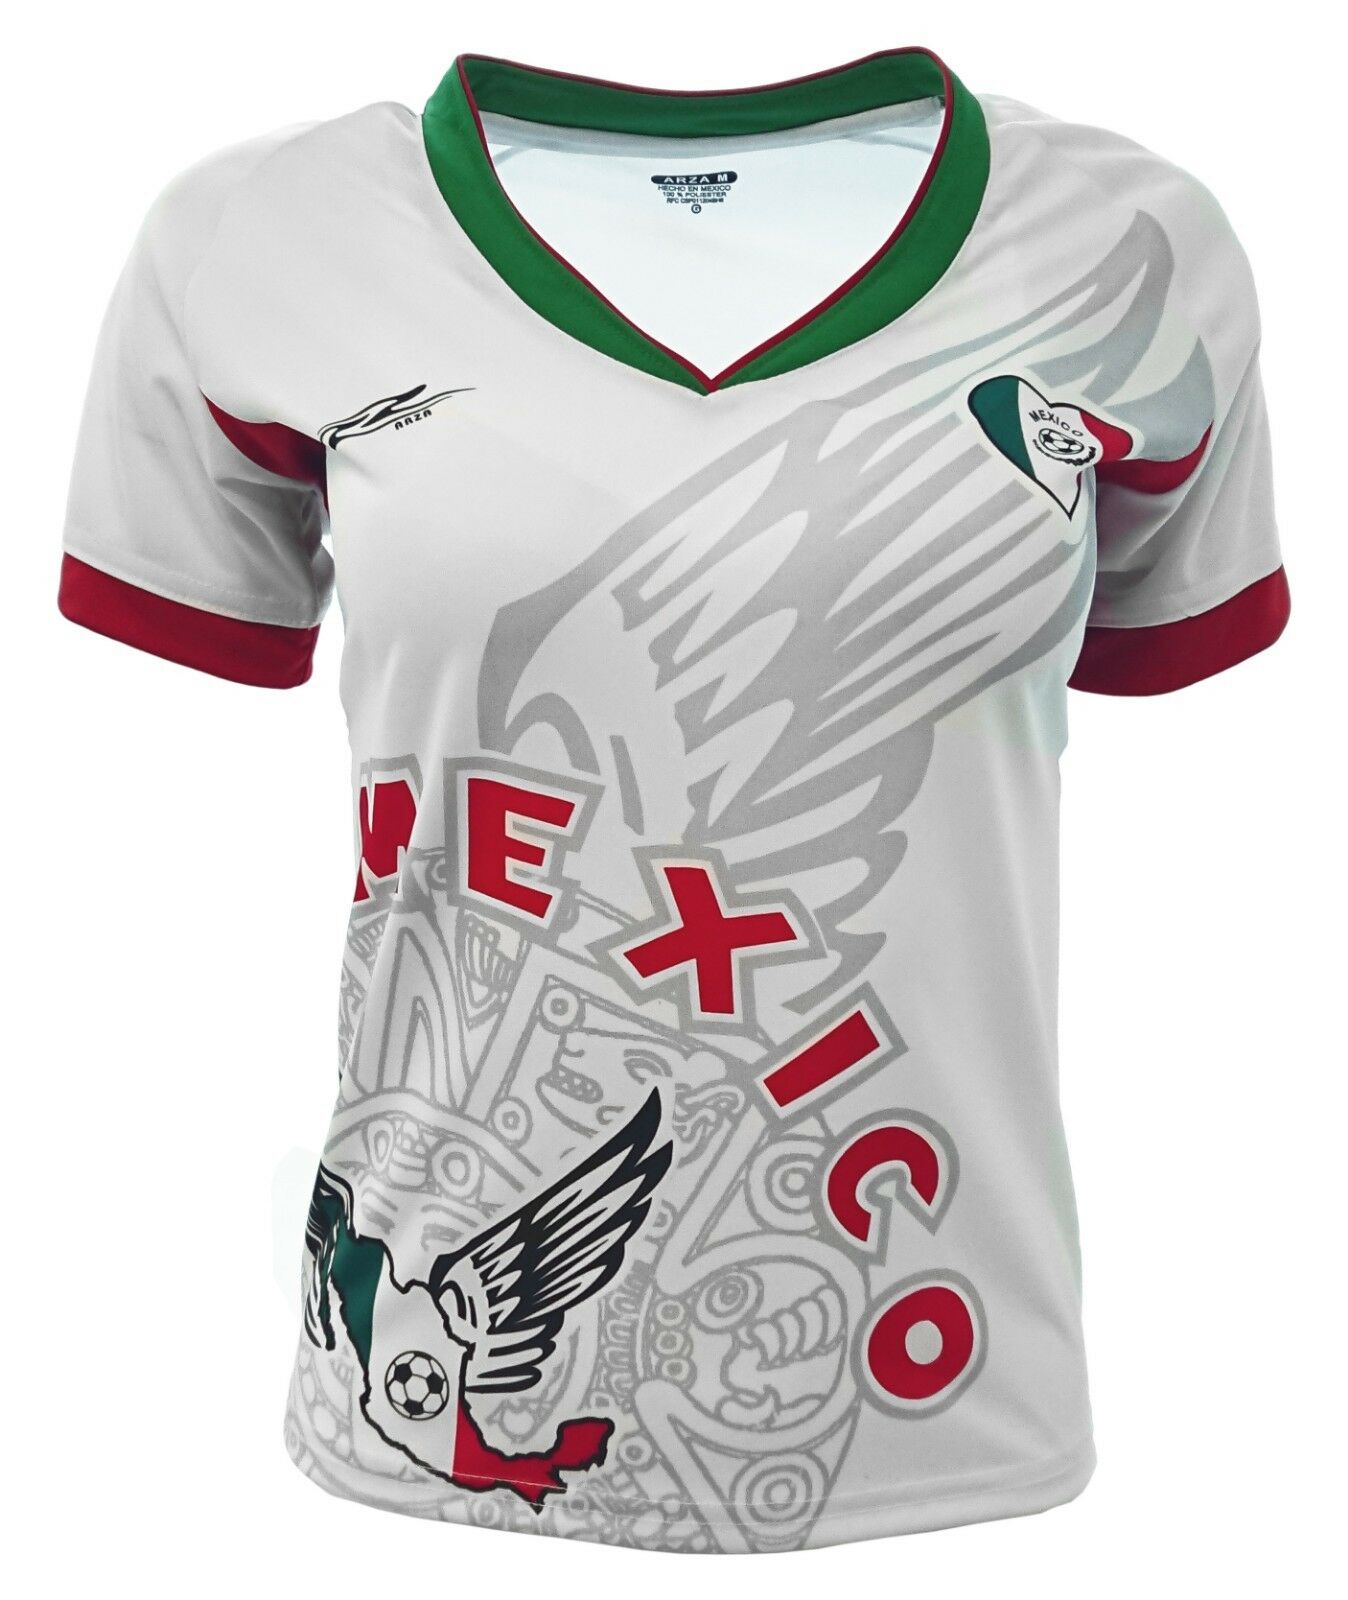 Mexico Women Fan Jersey White Exclusive Design_v Neck _made In Mexico.